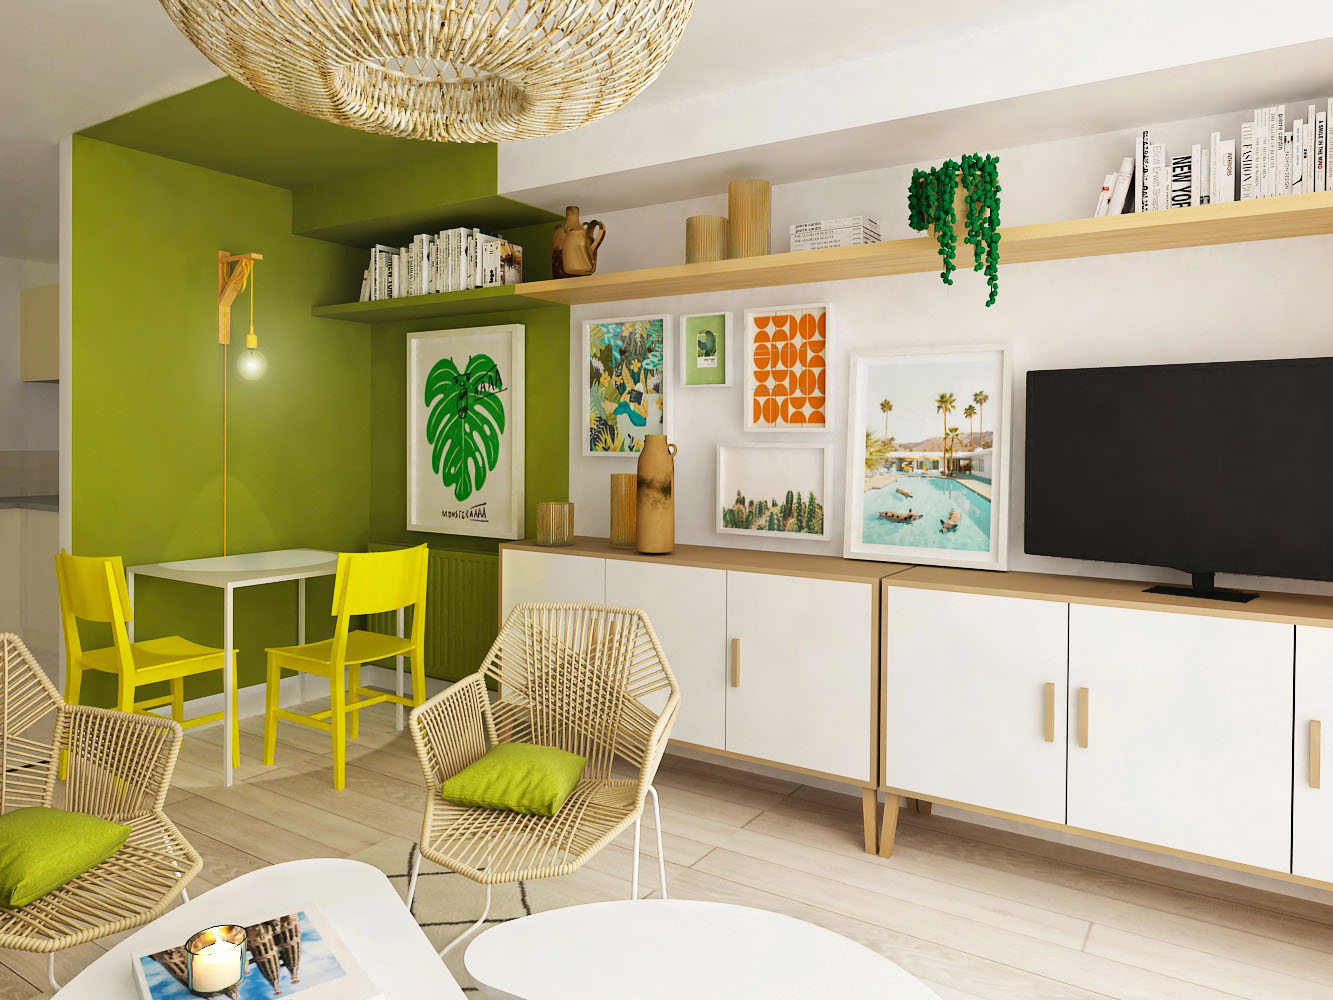 Tiny eating corner in green boho style living room with bright yellow chairs